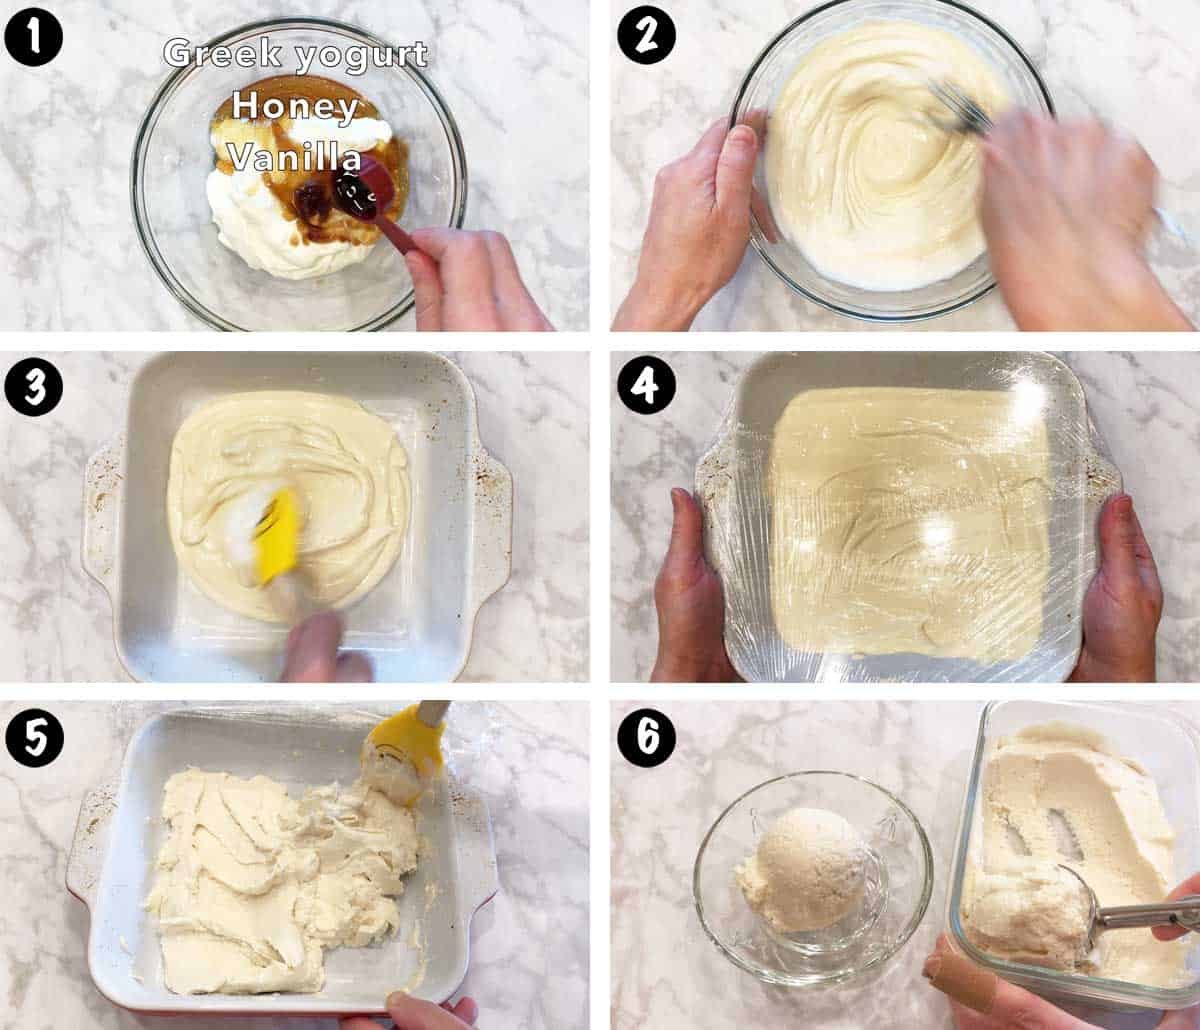 A photo collage showing the steps for making homemade frozen yogurt.  